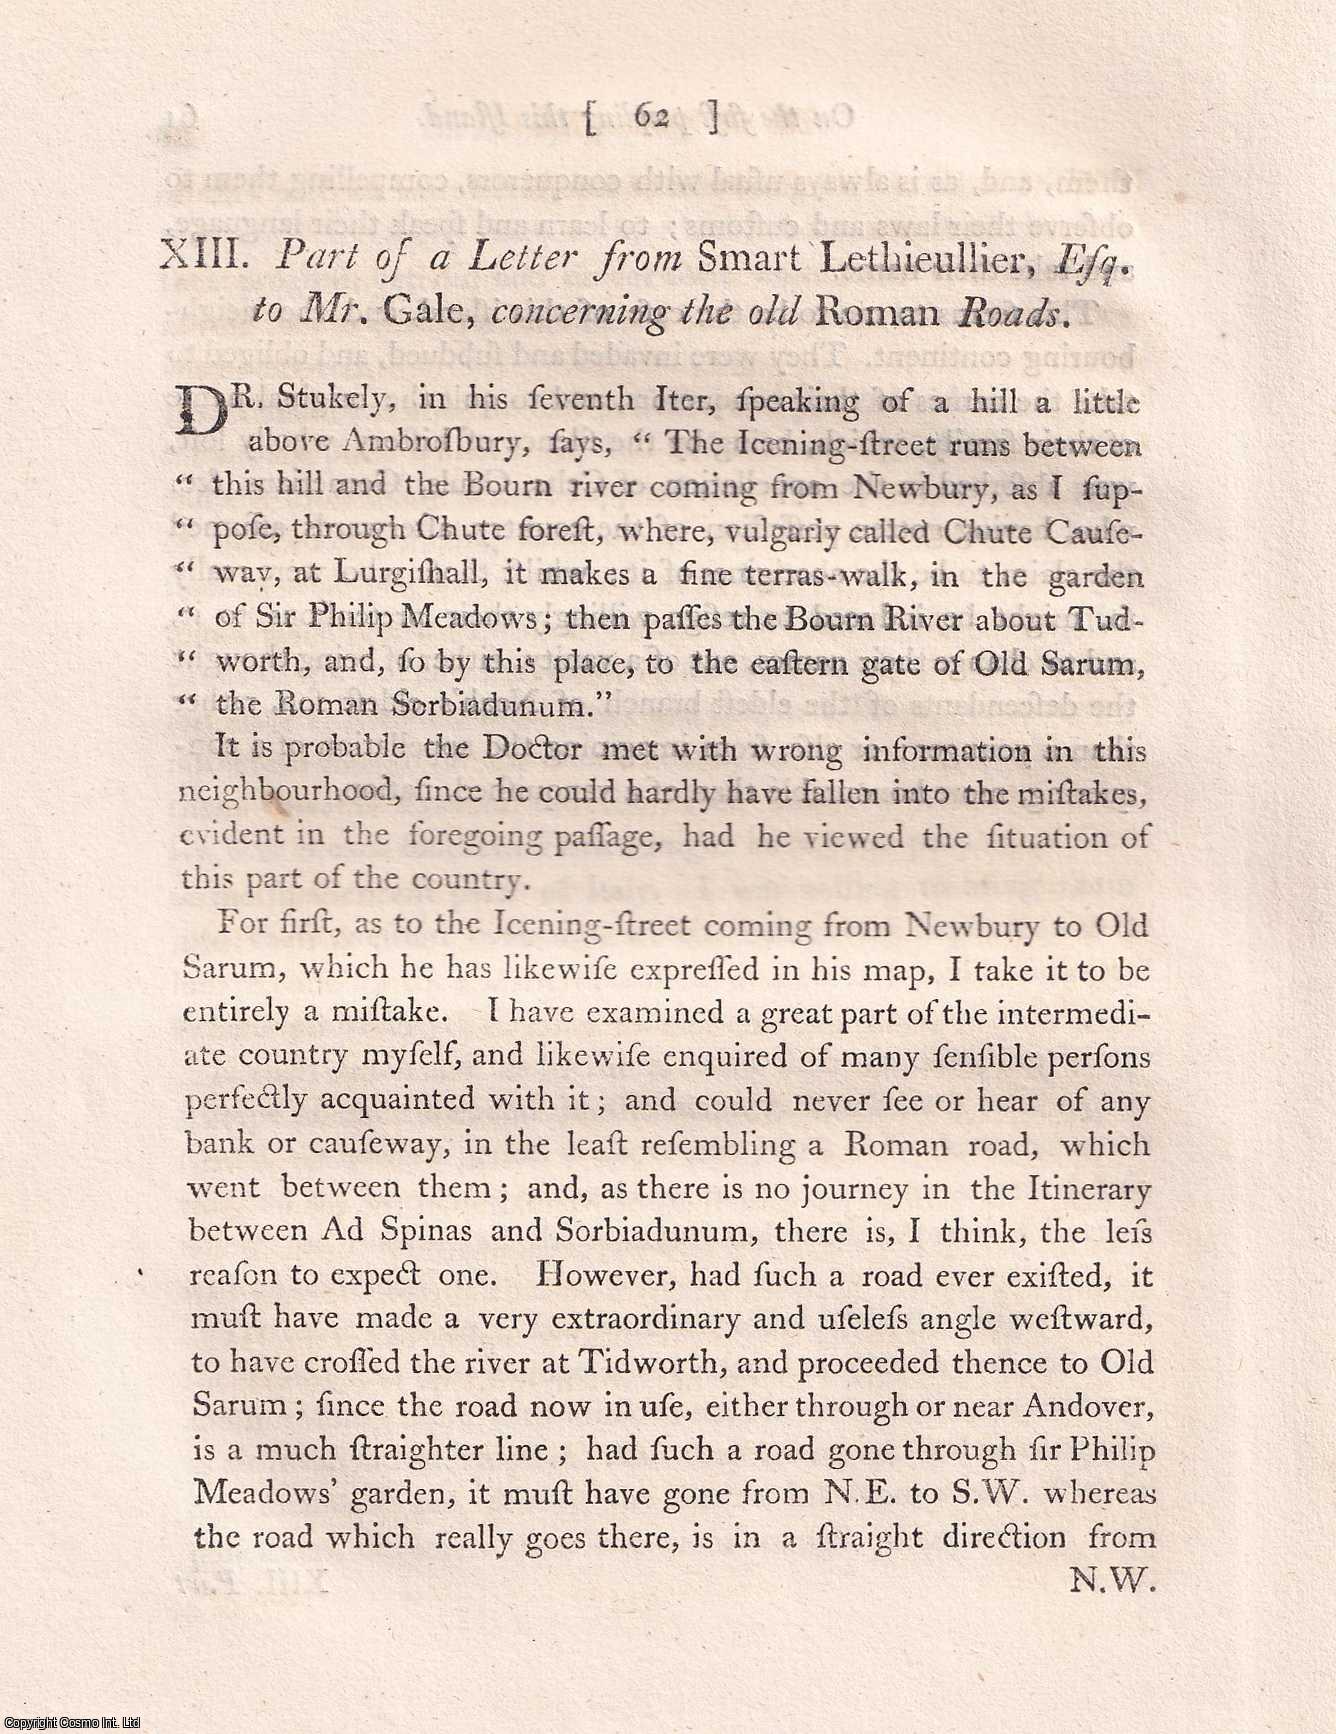 Smart Lethieullier - Concerning the old Roman Roads; a Letter from Smart Lethieullier, Esq; to Mr. Gale. An uncommon original article from the journal Archaeologia, 1770.